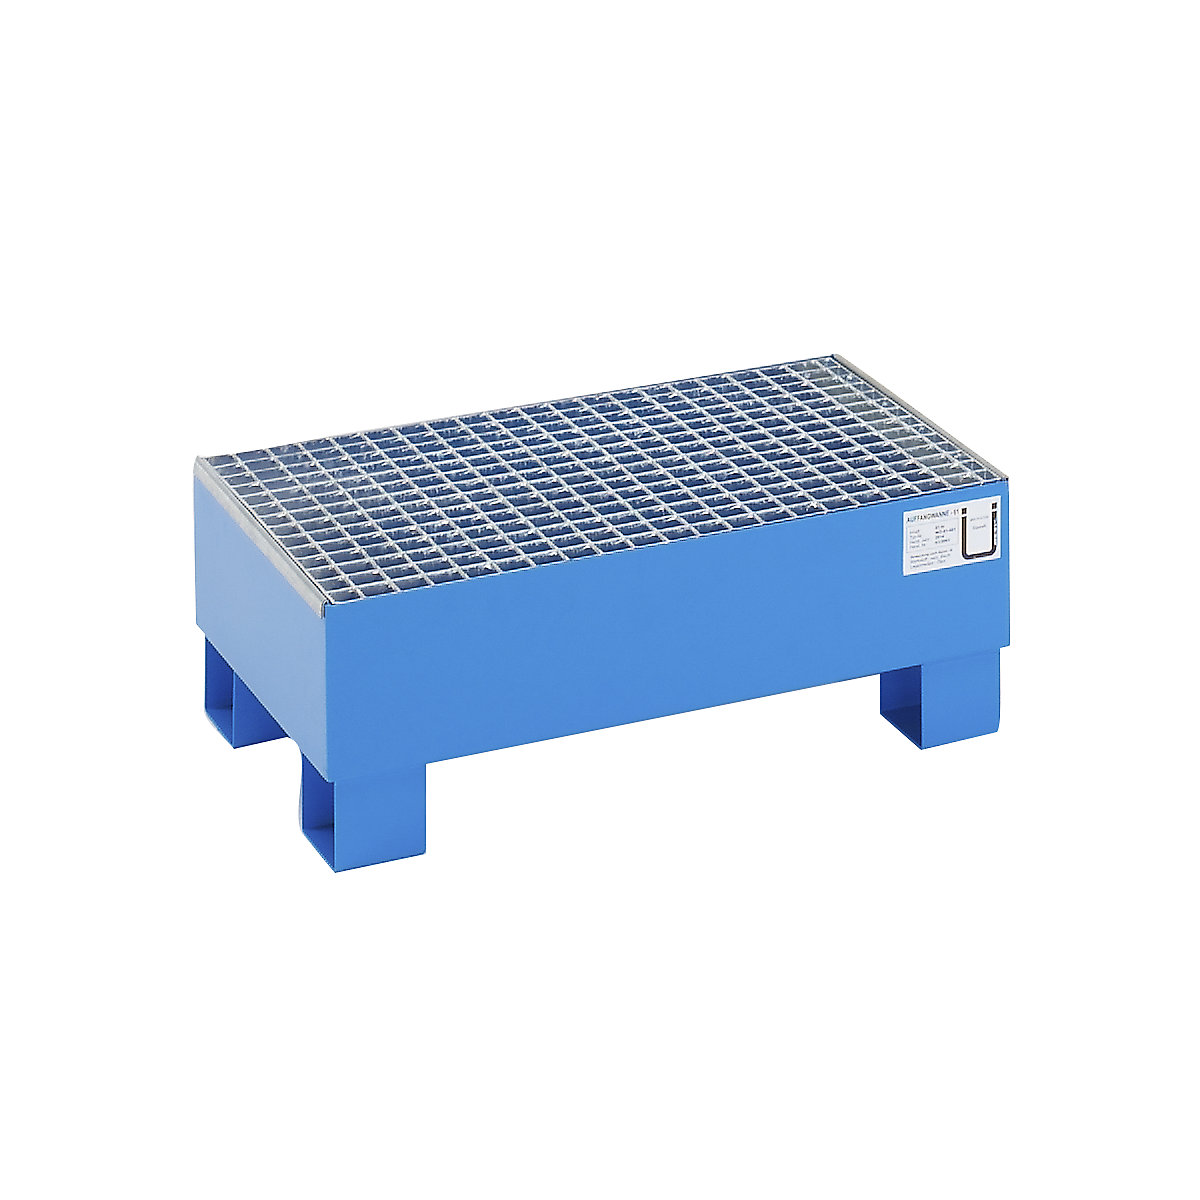 Sump tray for 60 l – eurokraft basic, LxWxH 800 x 500 x 290 mm, with certification, powder coated blue, with grate-2